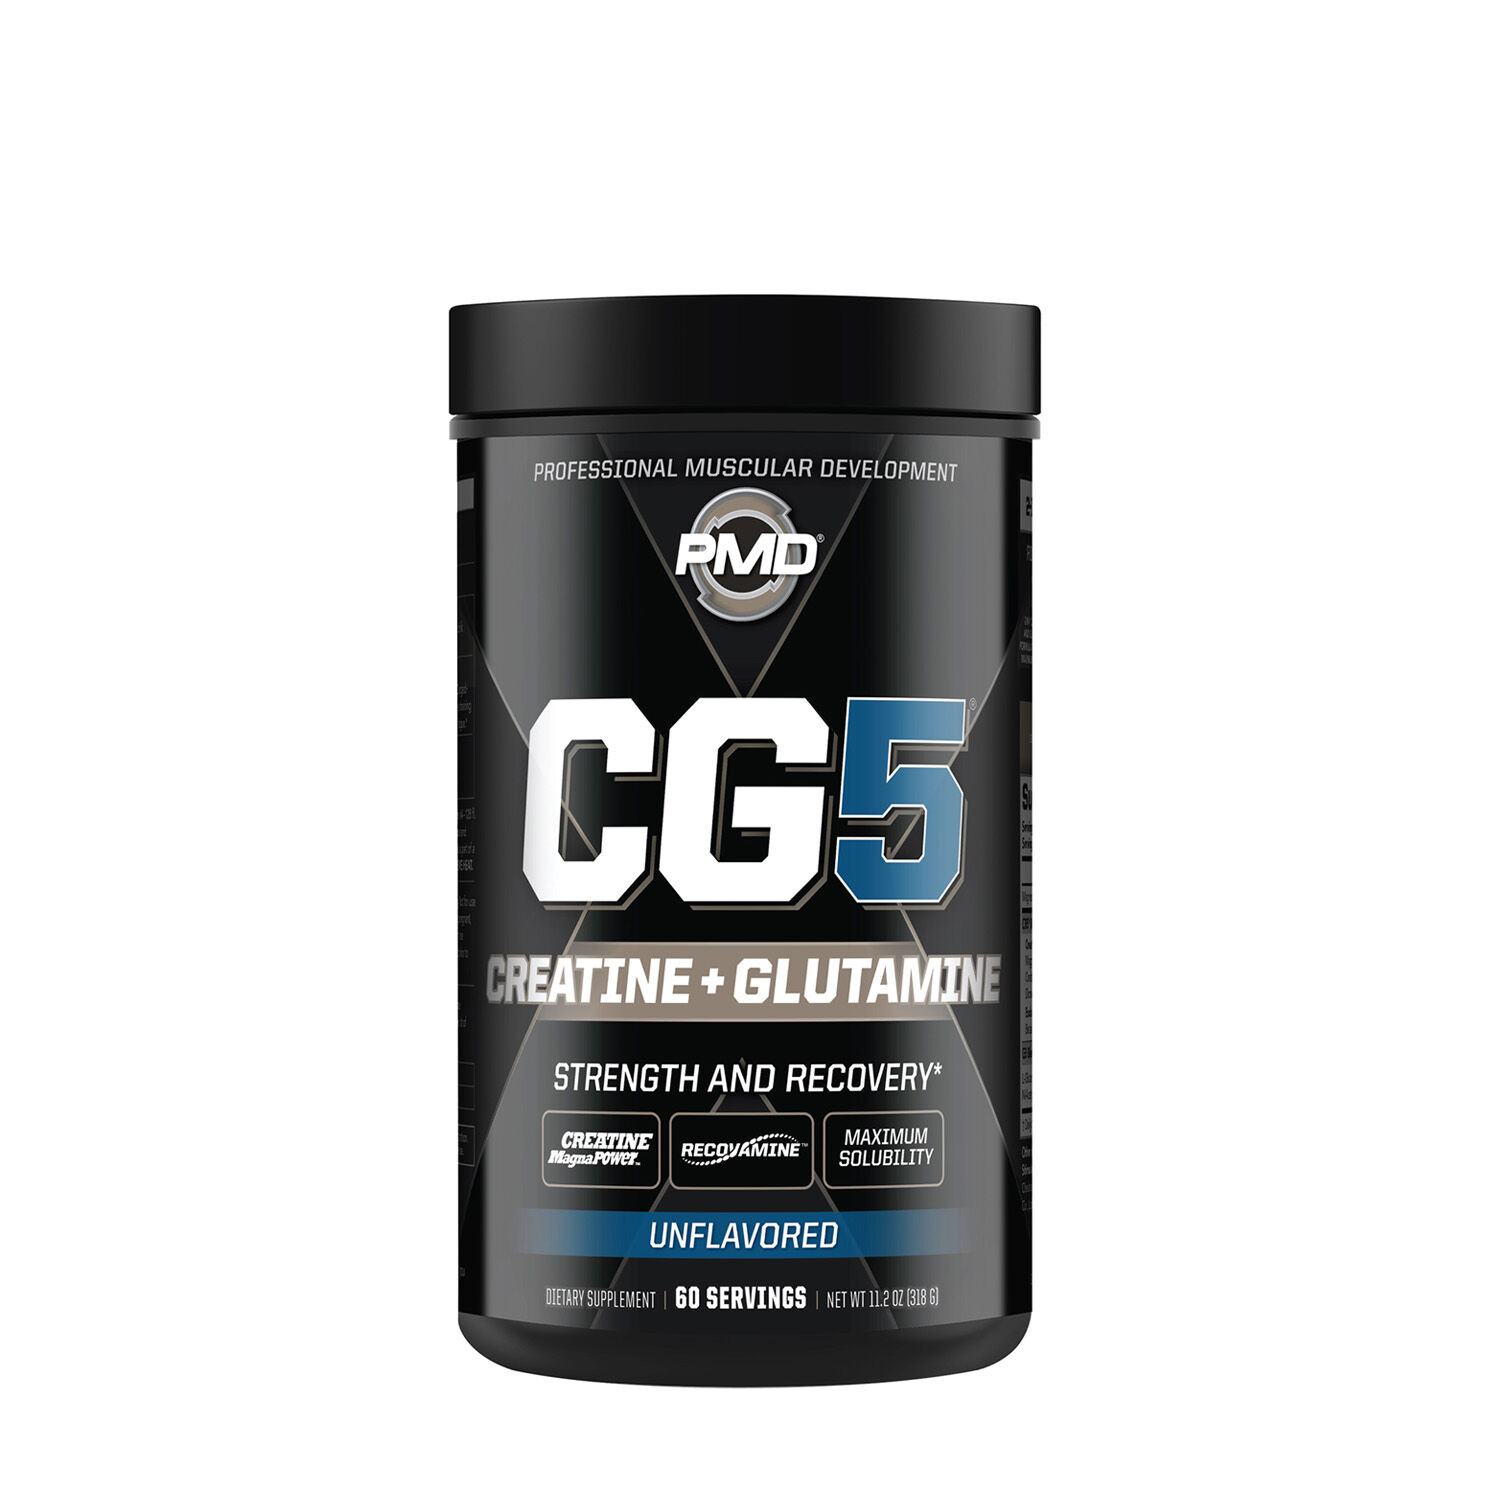 L-Glutamine Gain Muscle Mass Strength and Energy FAST AND FREE... L-Creatine 